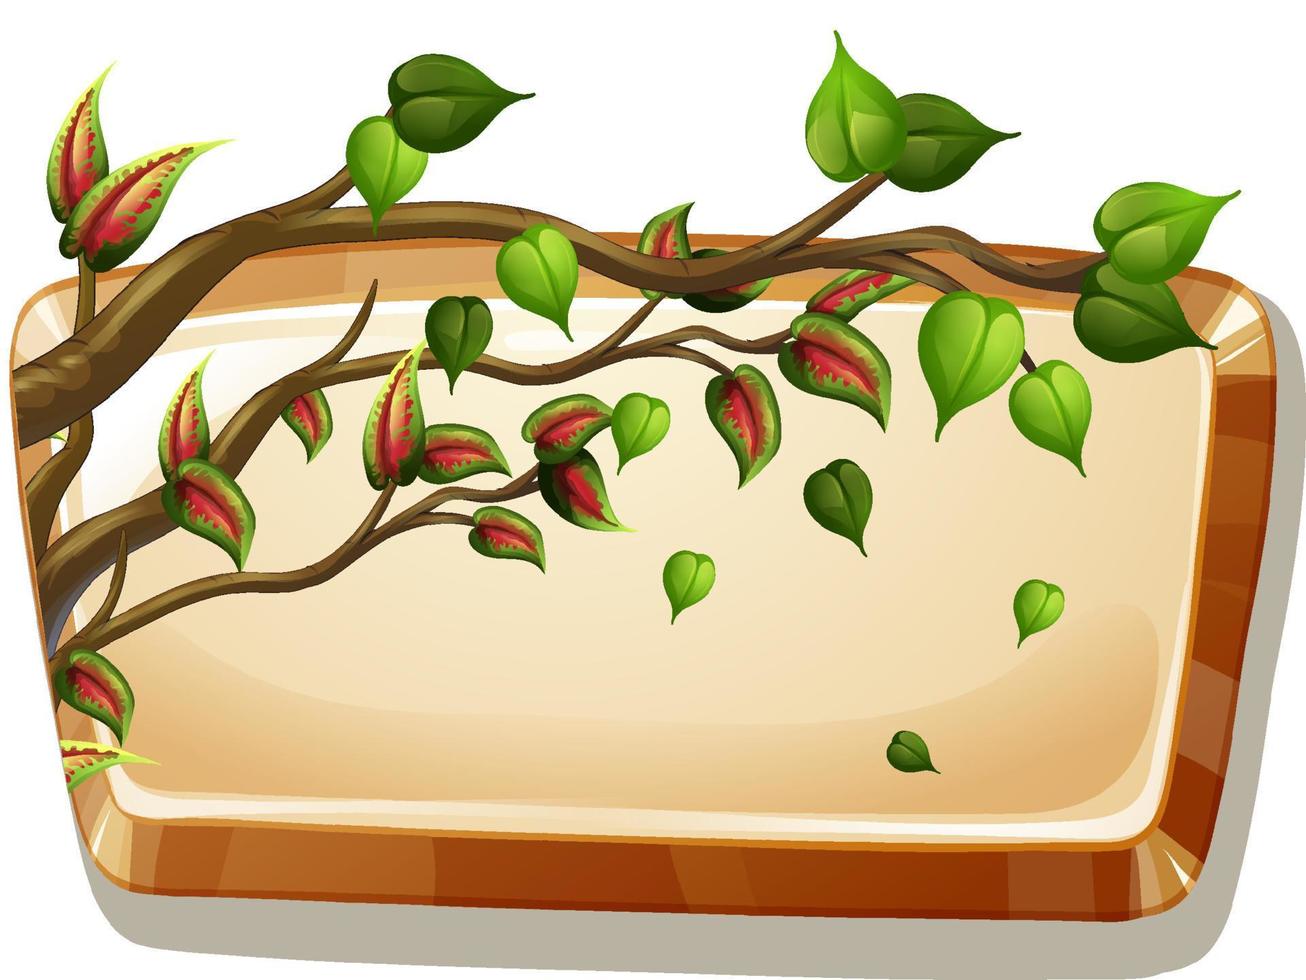 Wooden board template with tree branch vector